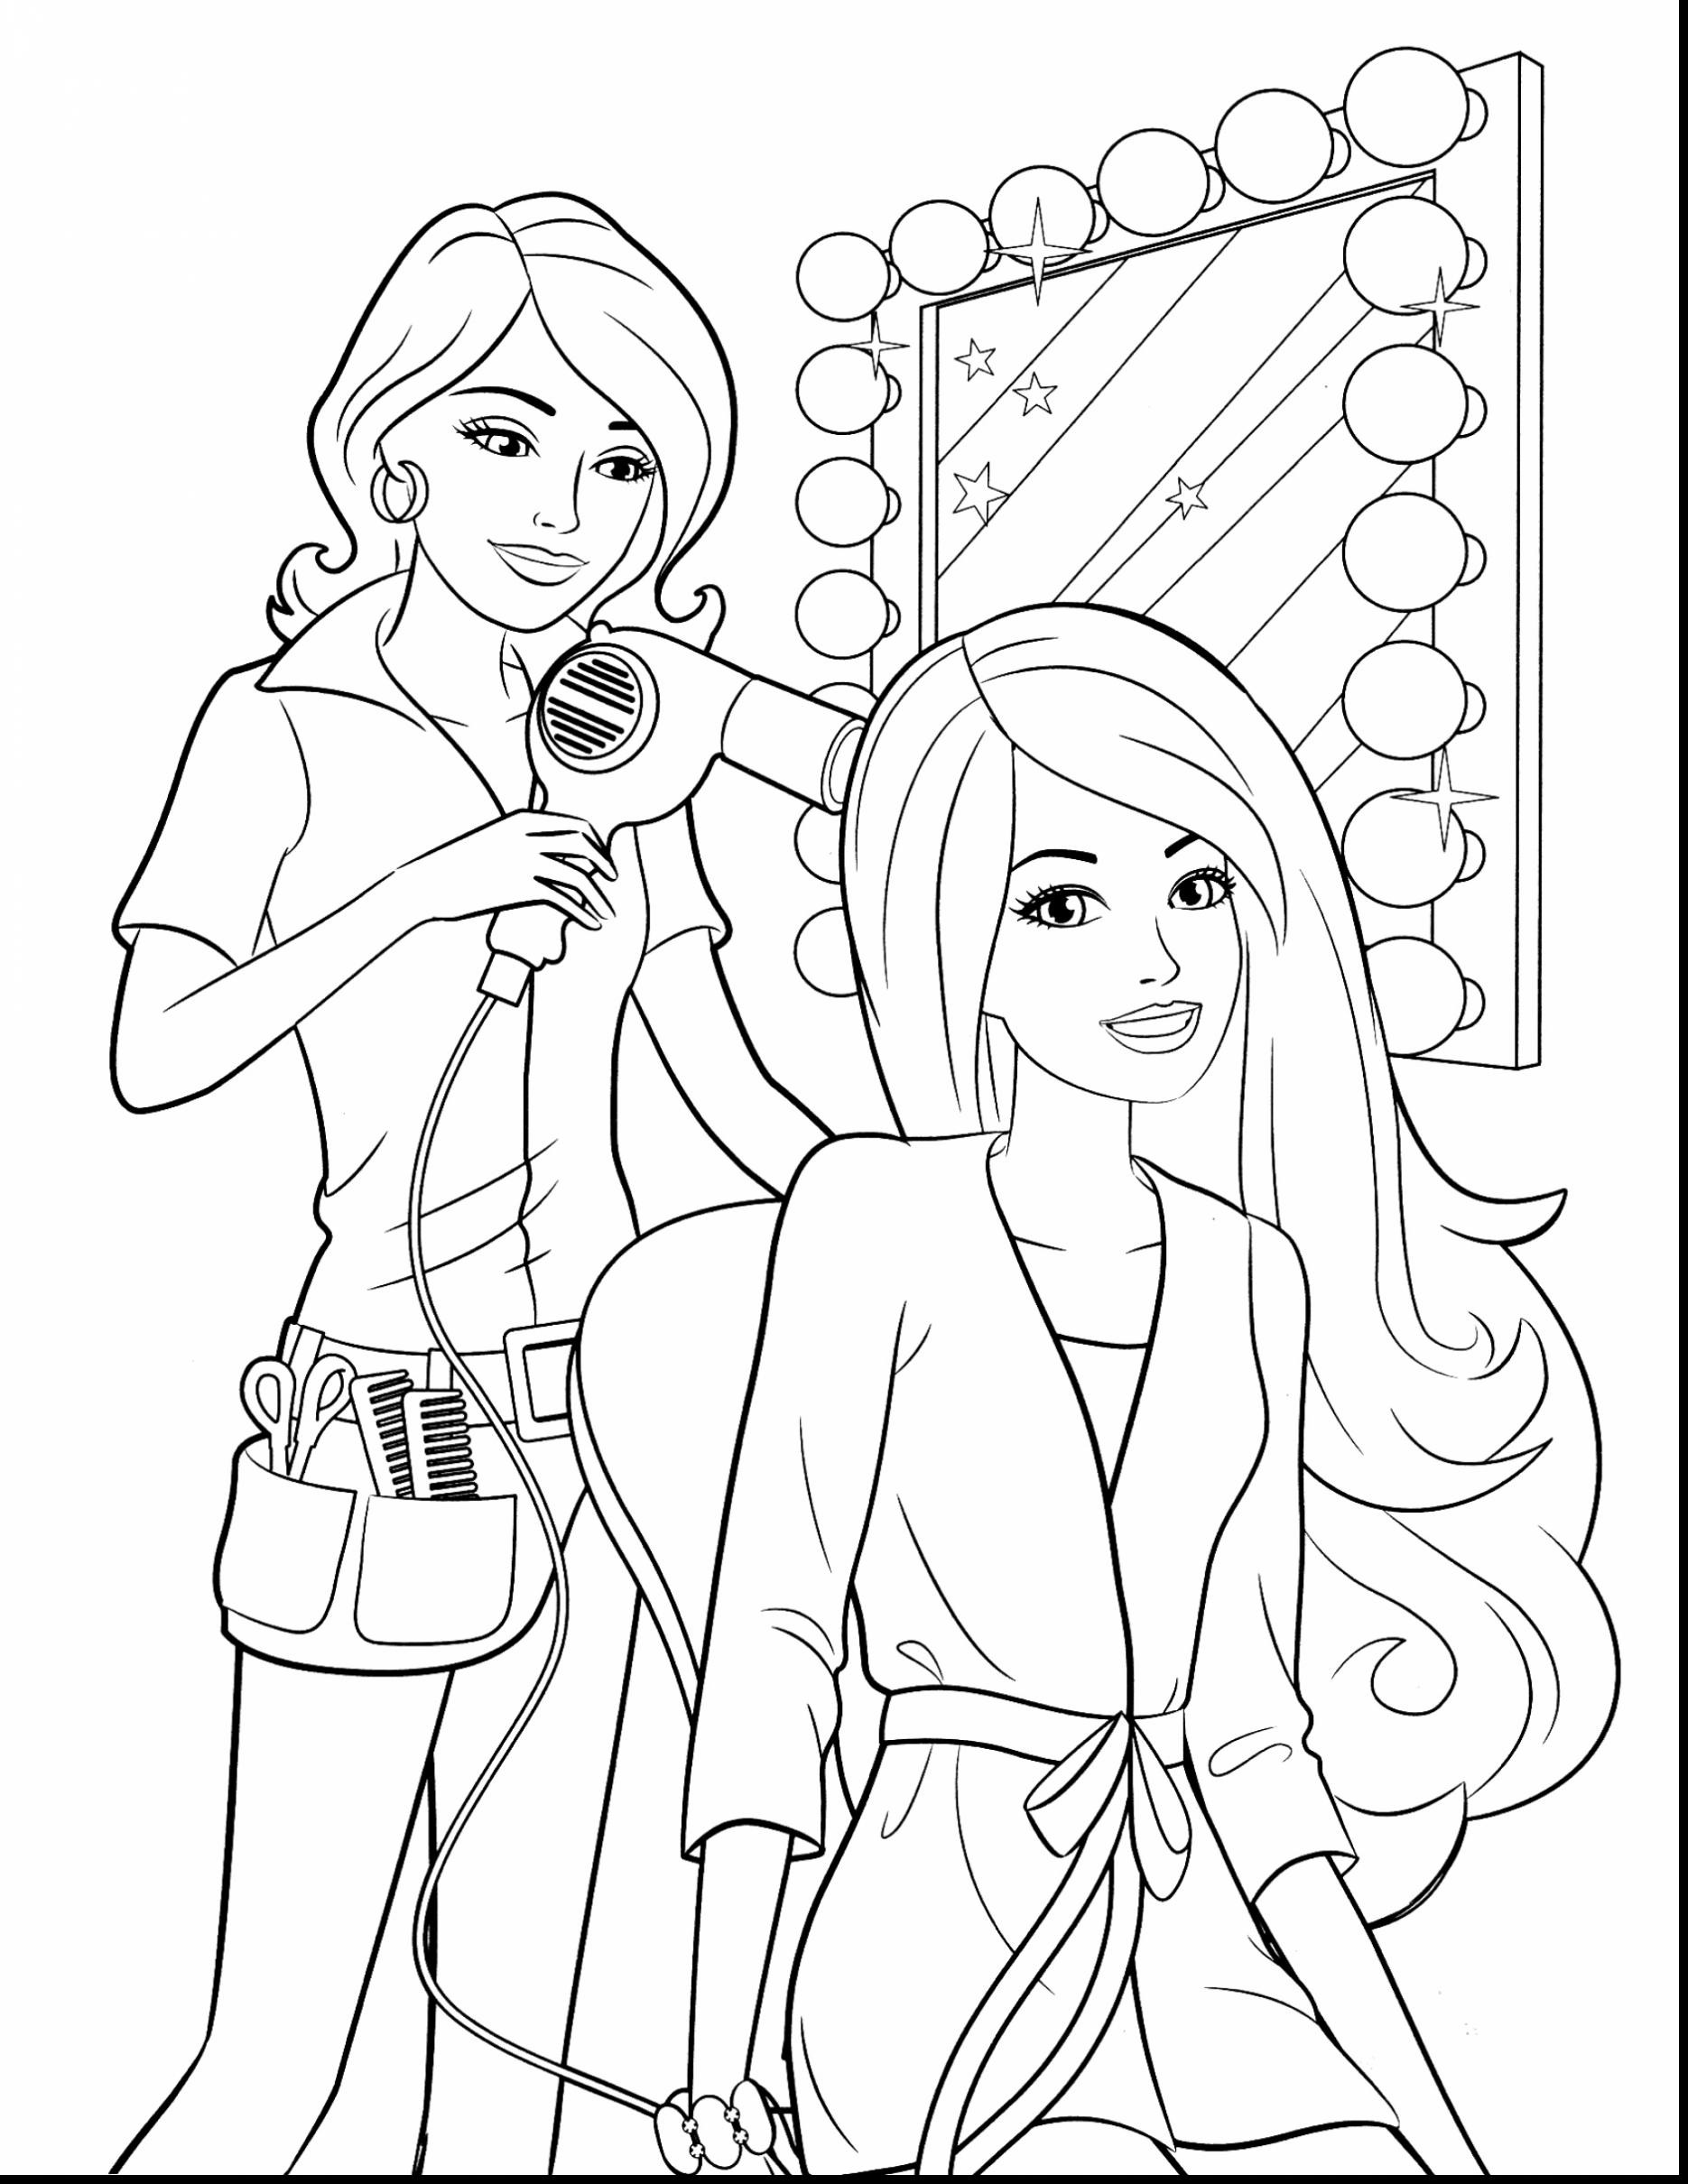 Barbie Coloring Pages Online Wallpaper